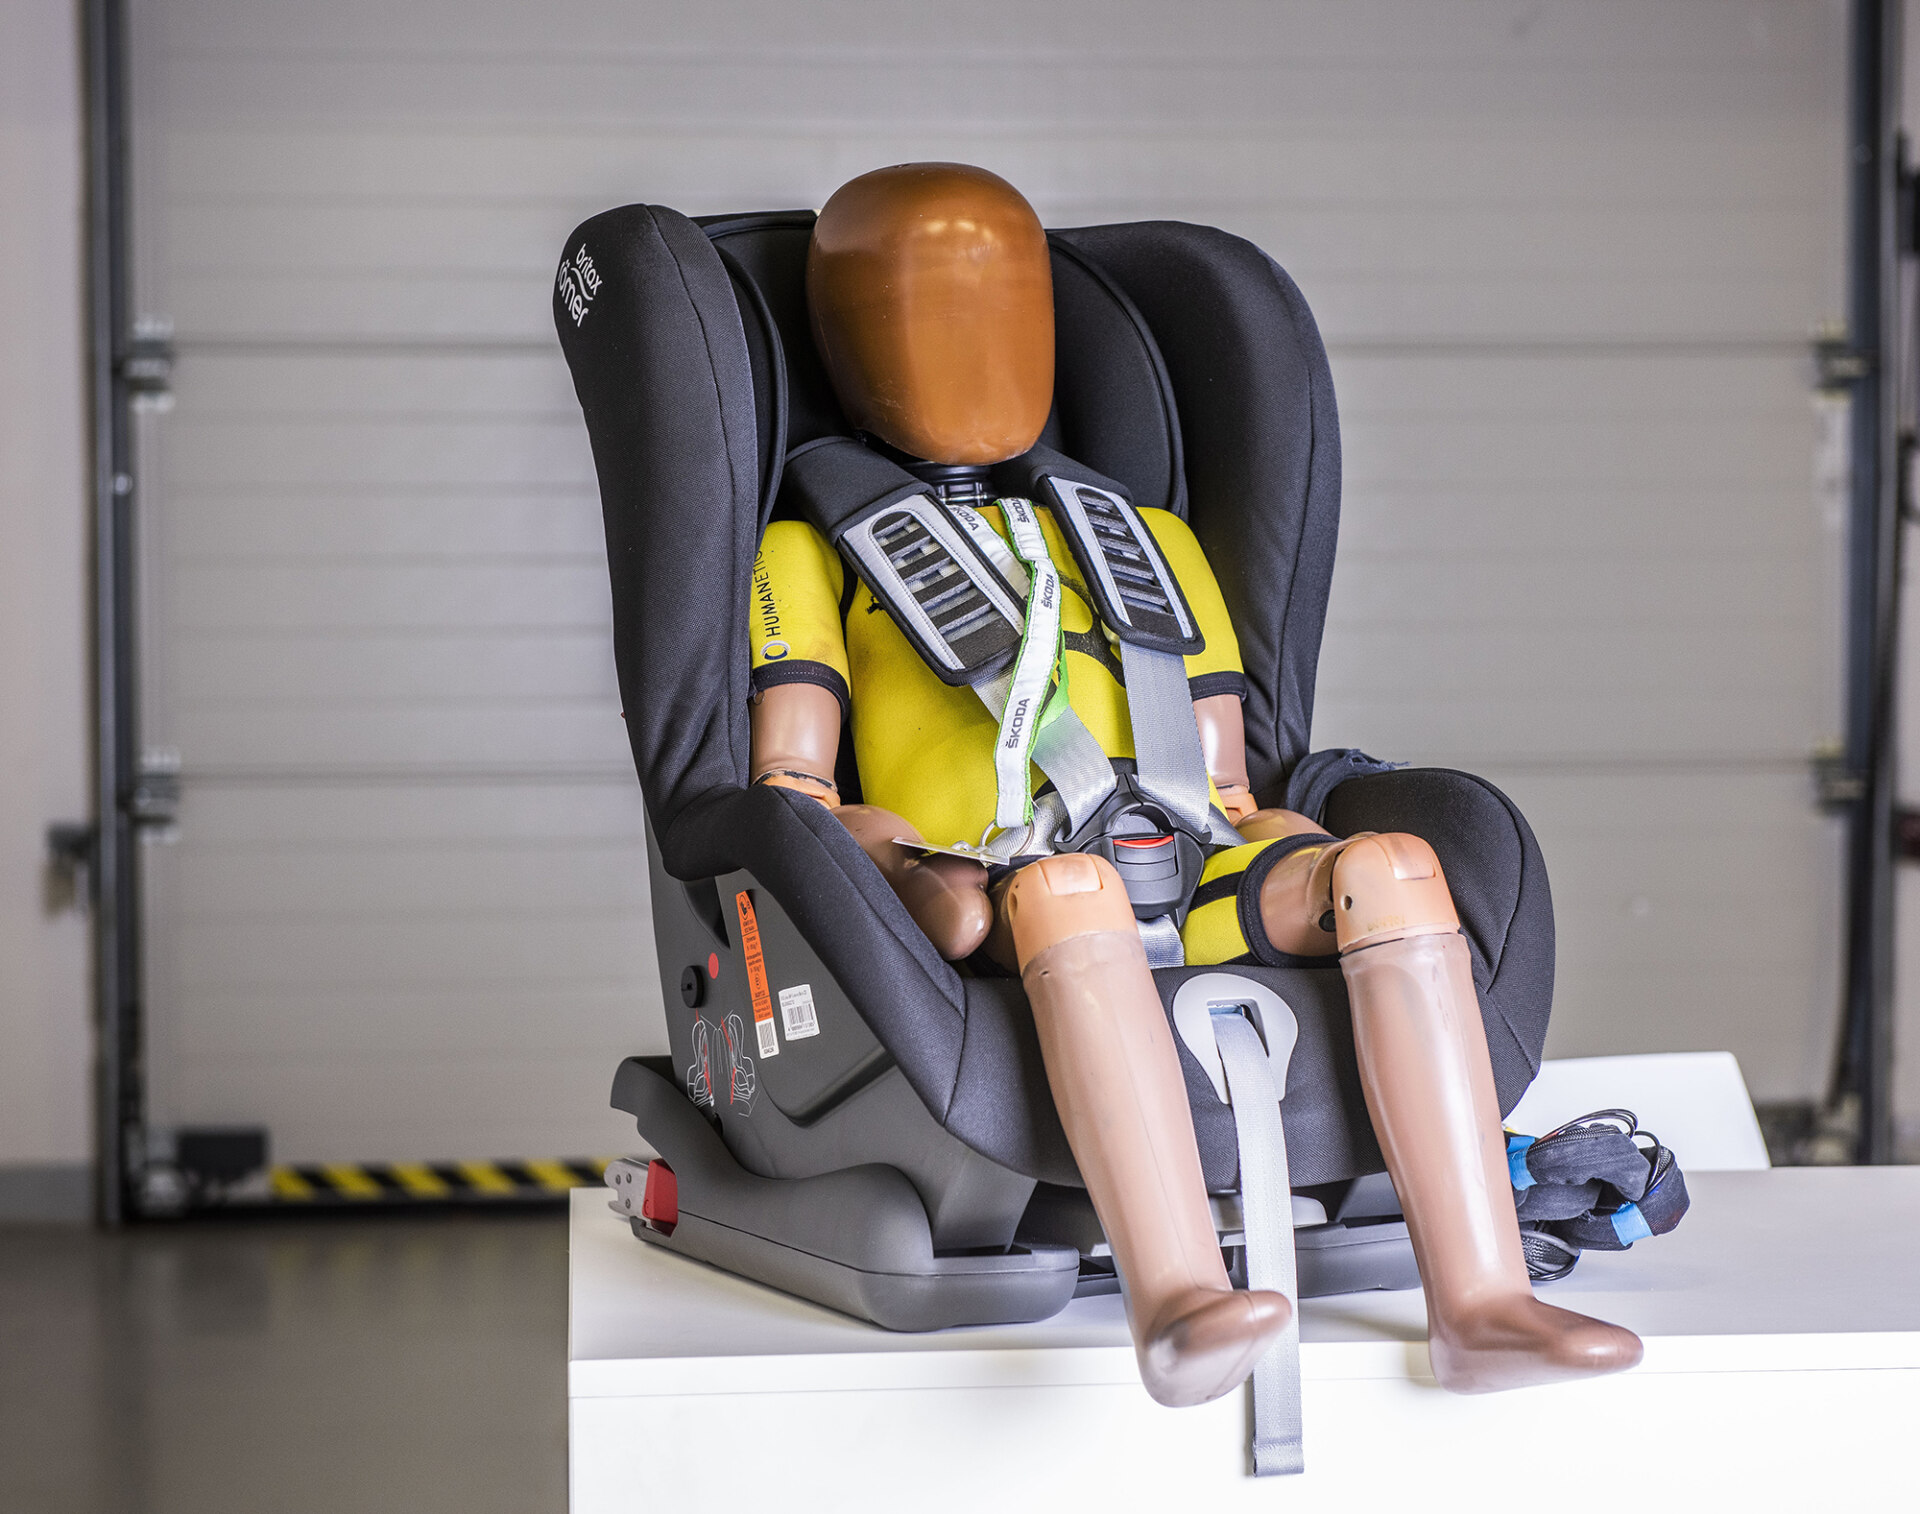 Child dummies range in age from 1.5 years to 3, 6 and 10